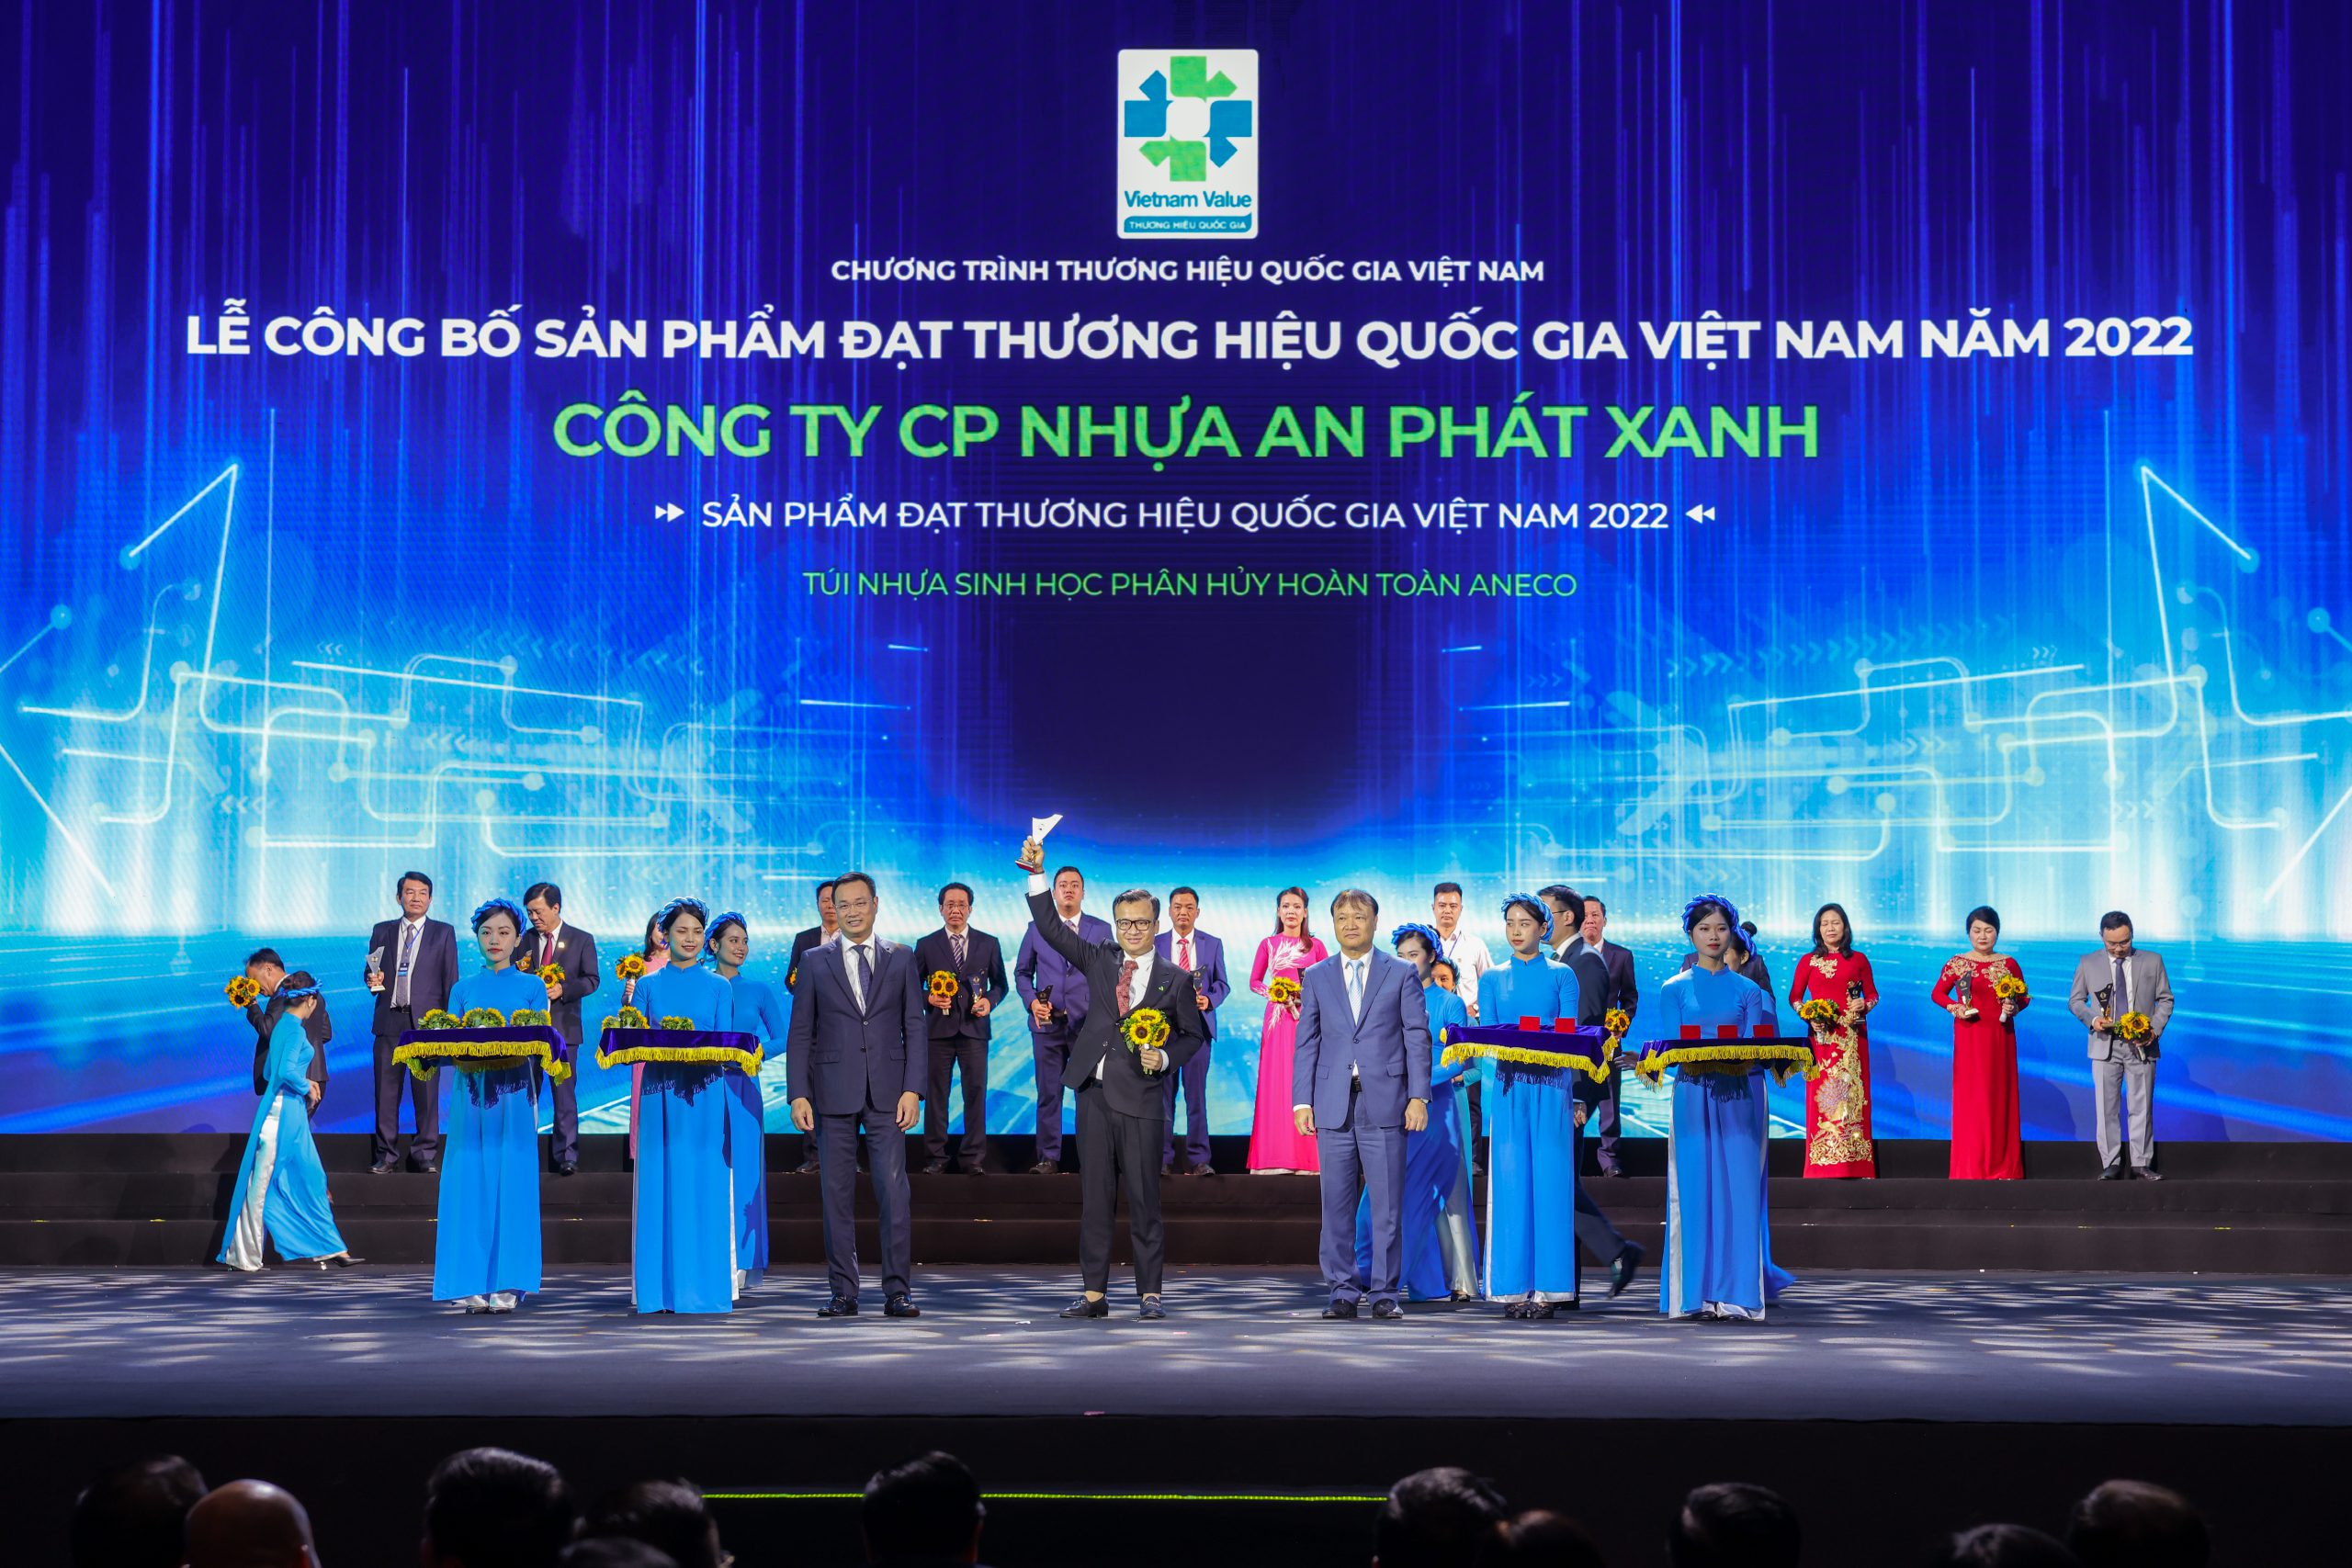 Compostable products honored as Vietnam's National Brand for the first time